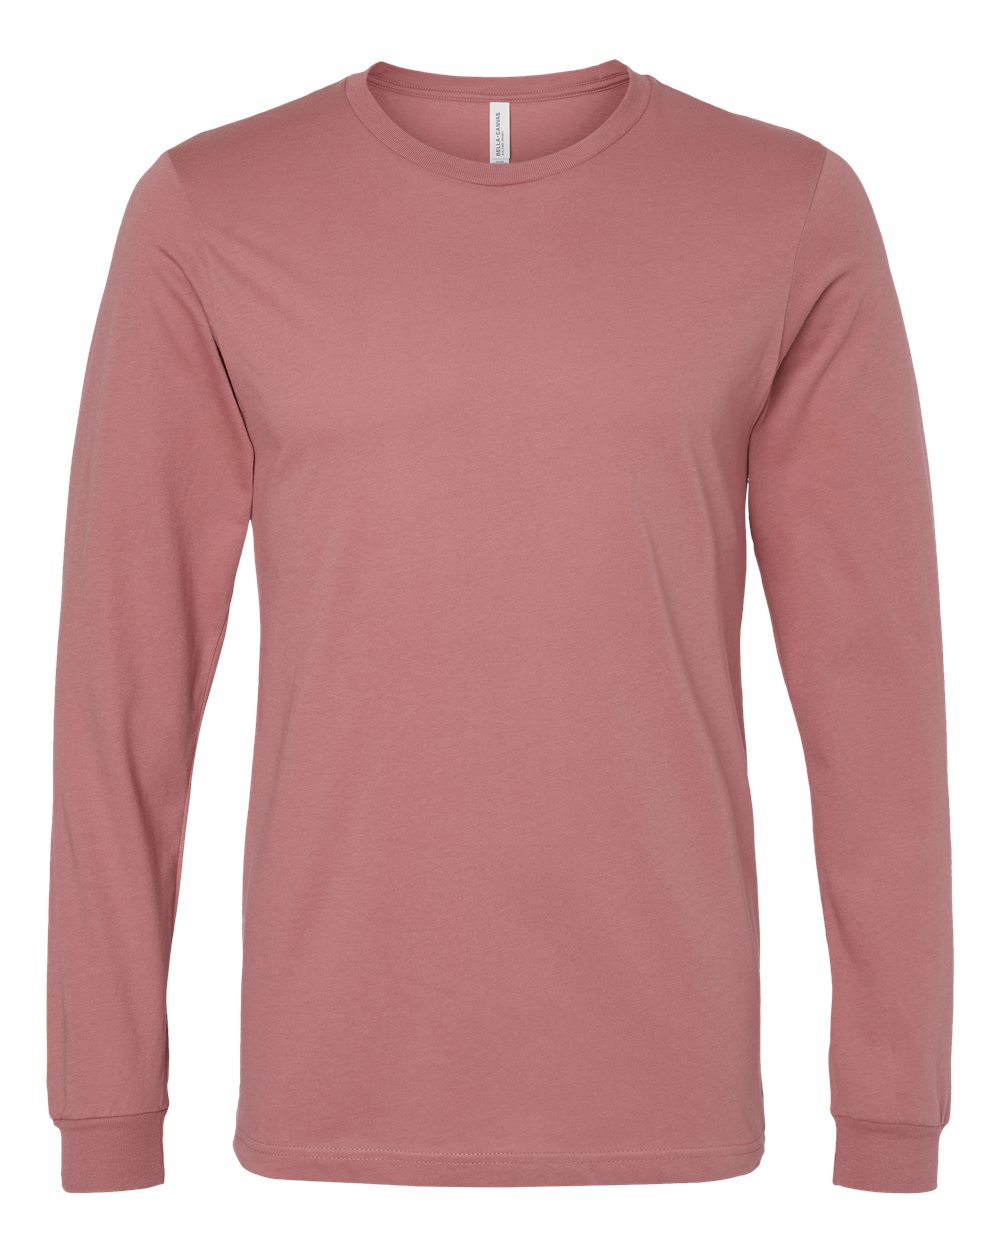 Bella + Canvas Long Sleeve (3501) in Mauve